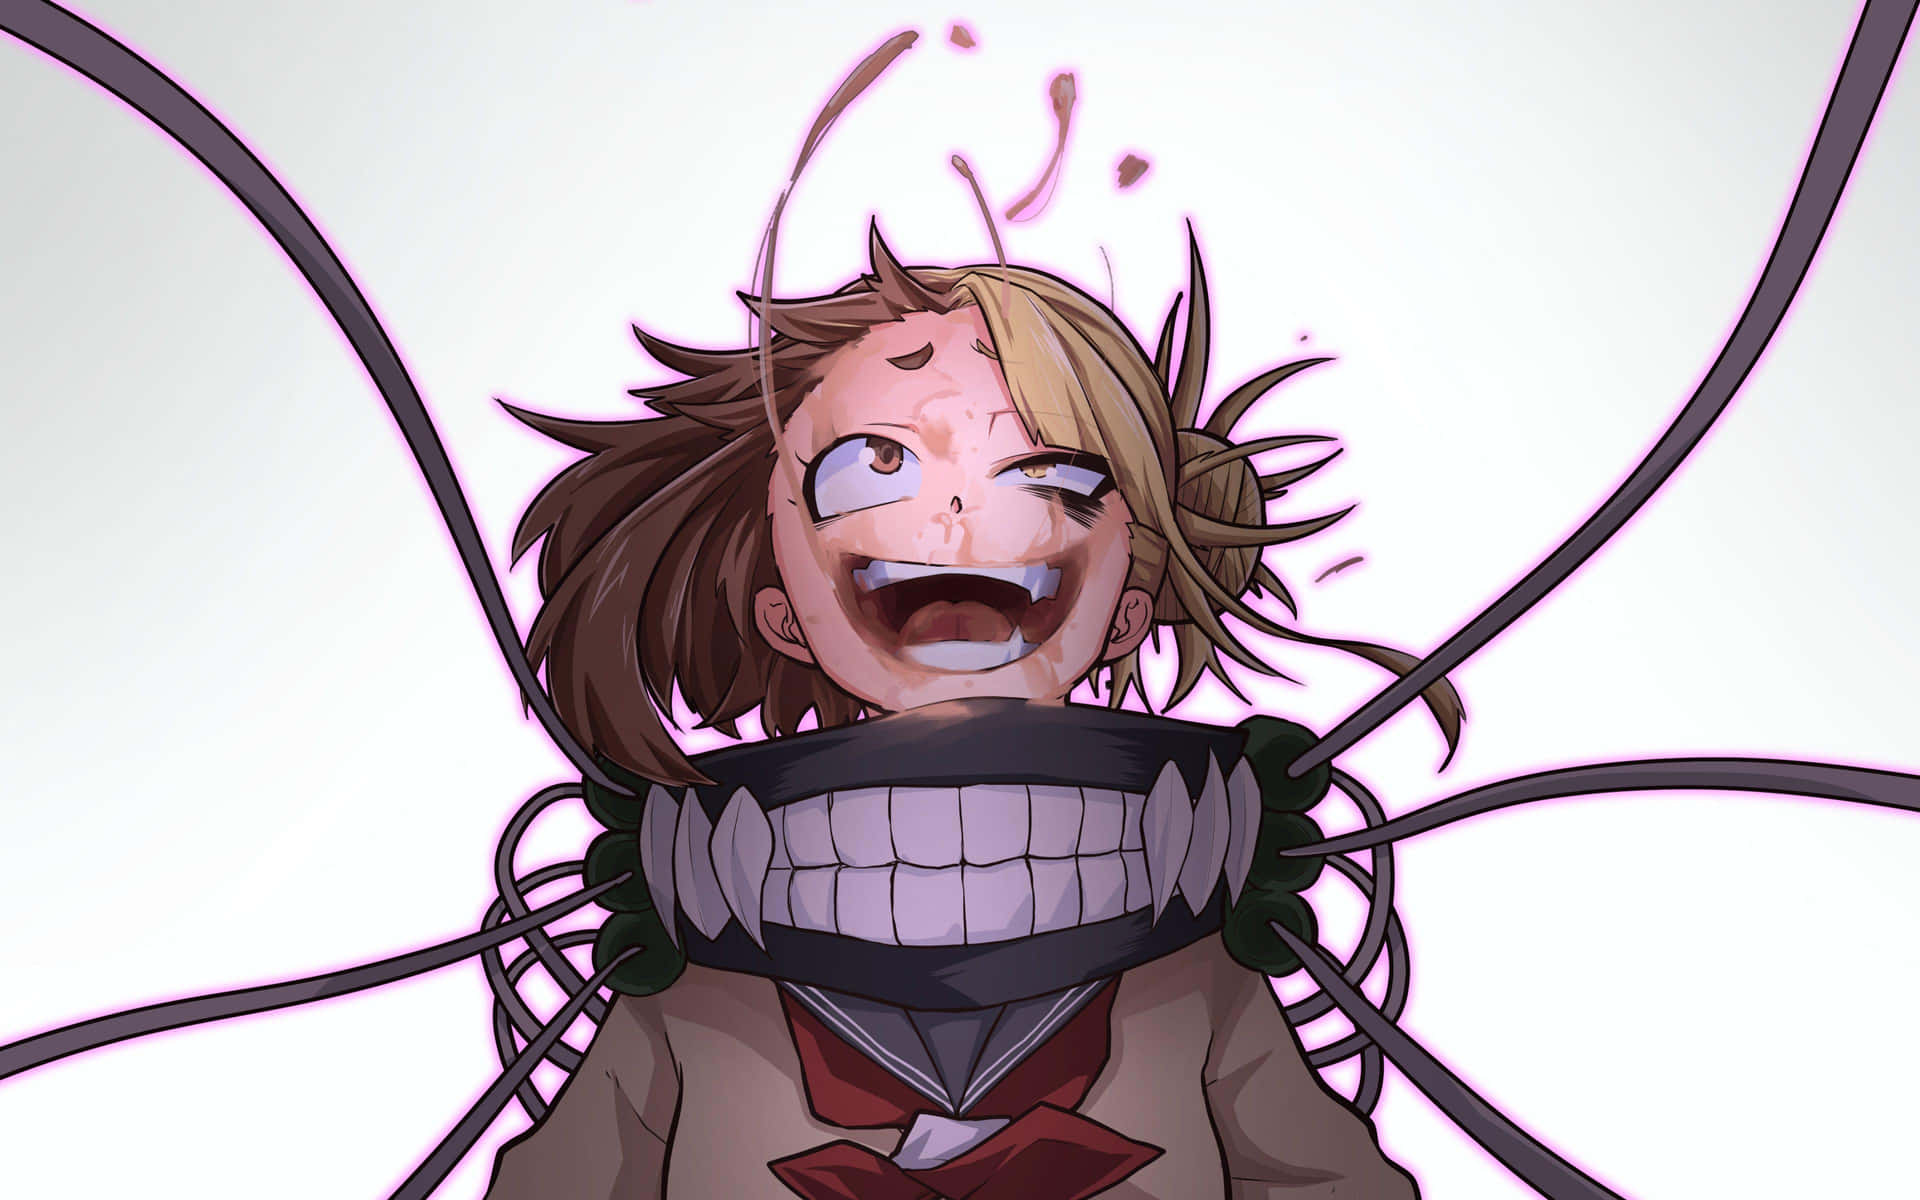 The Mysterious Aesthetic of Himiko Toga Wallpaper